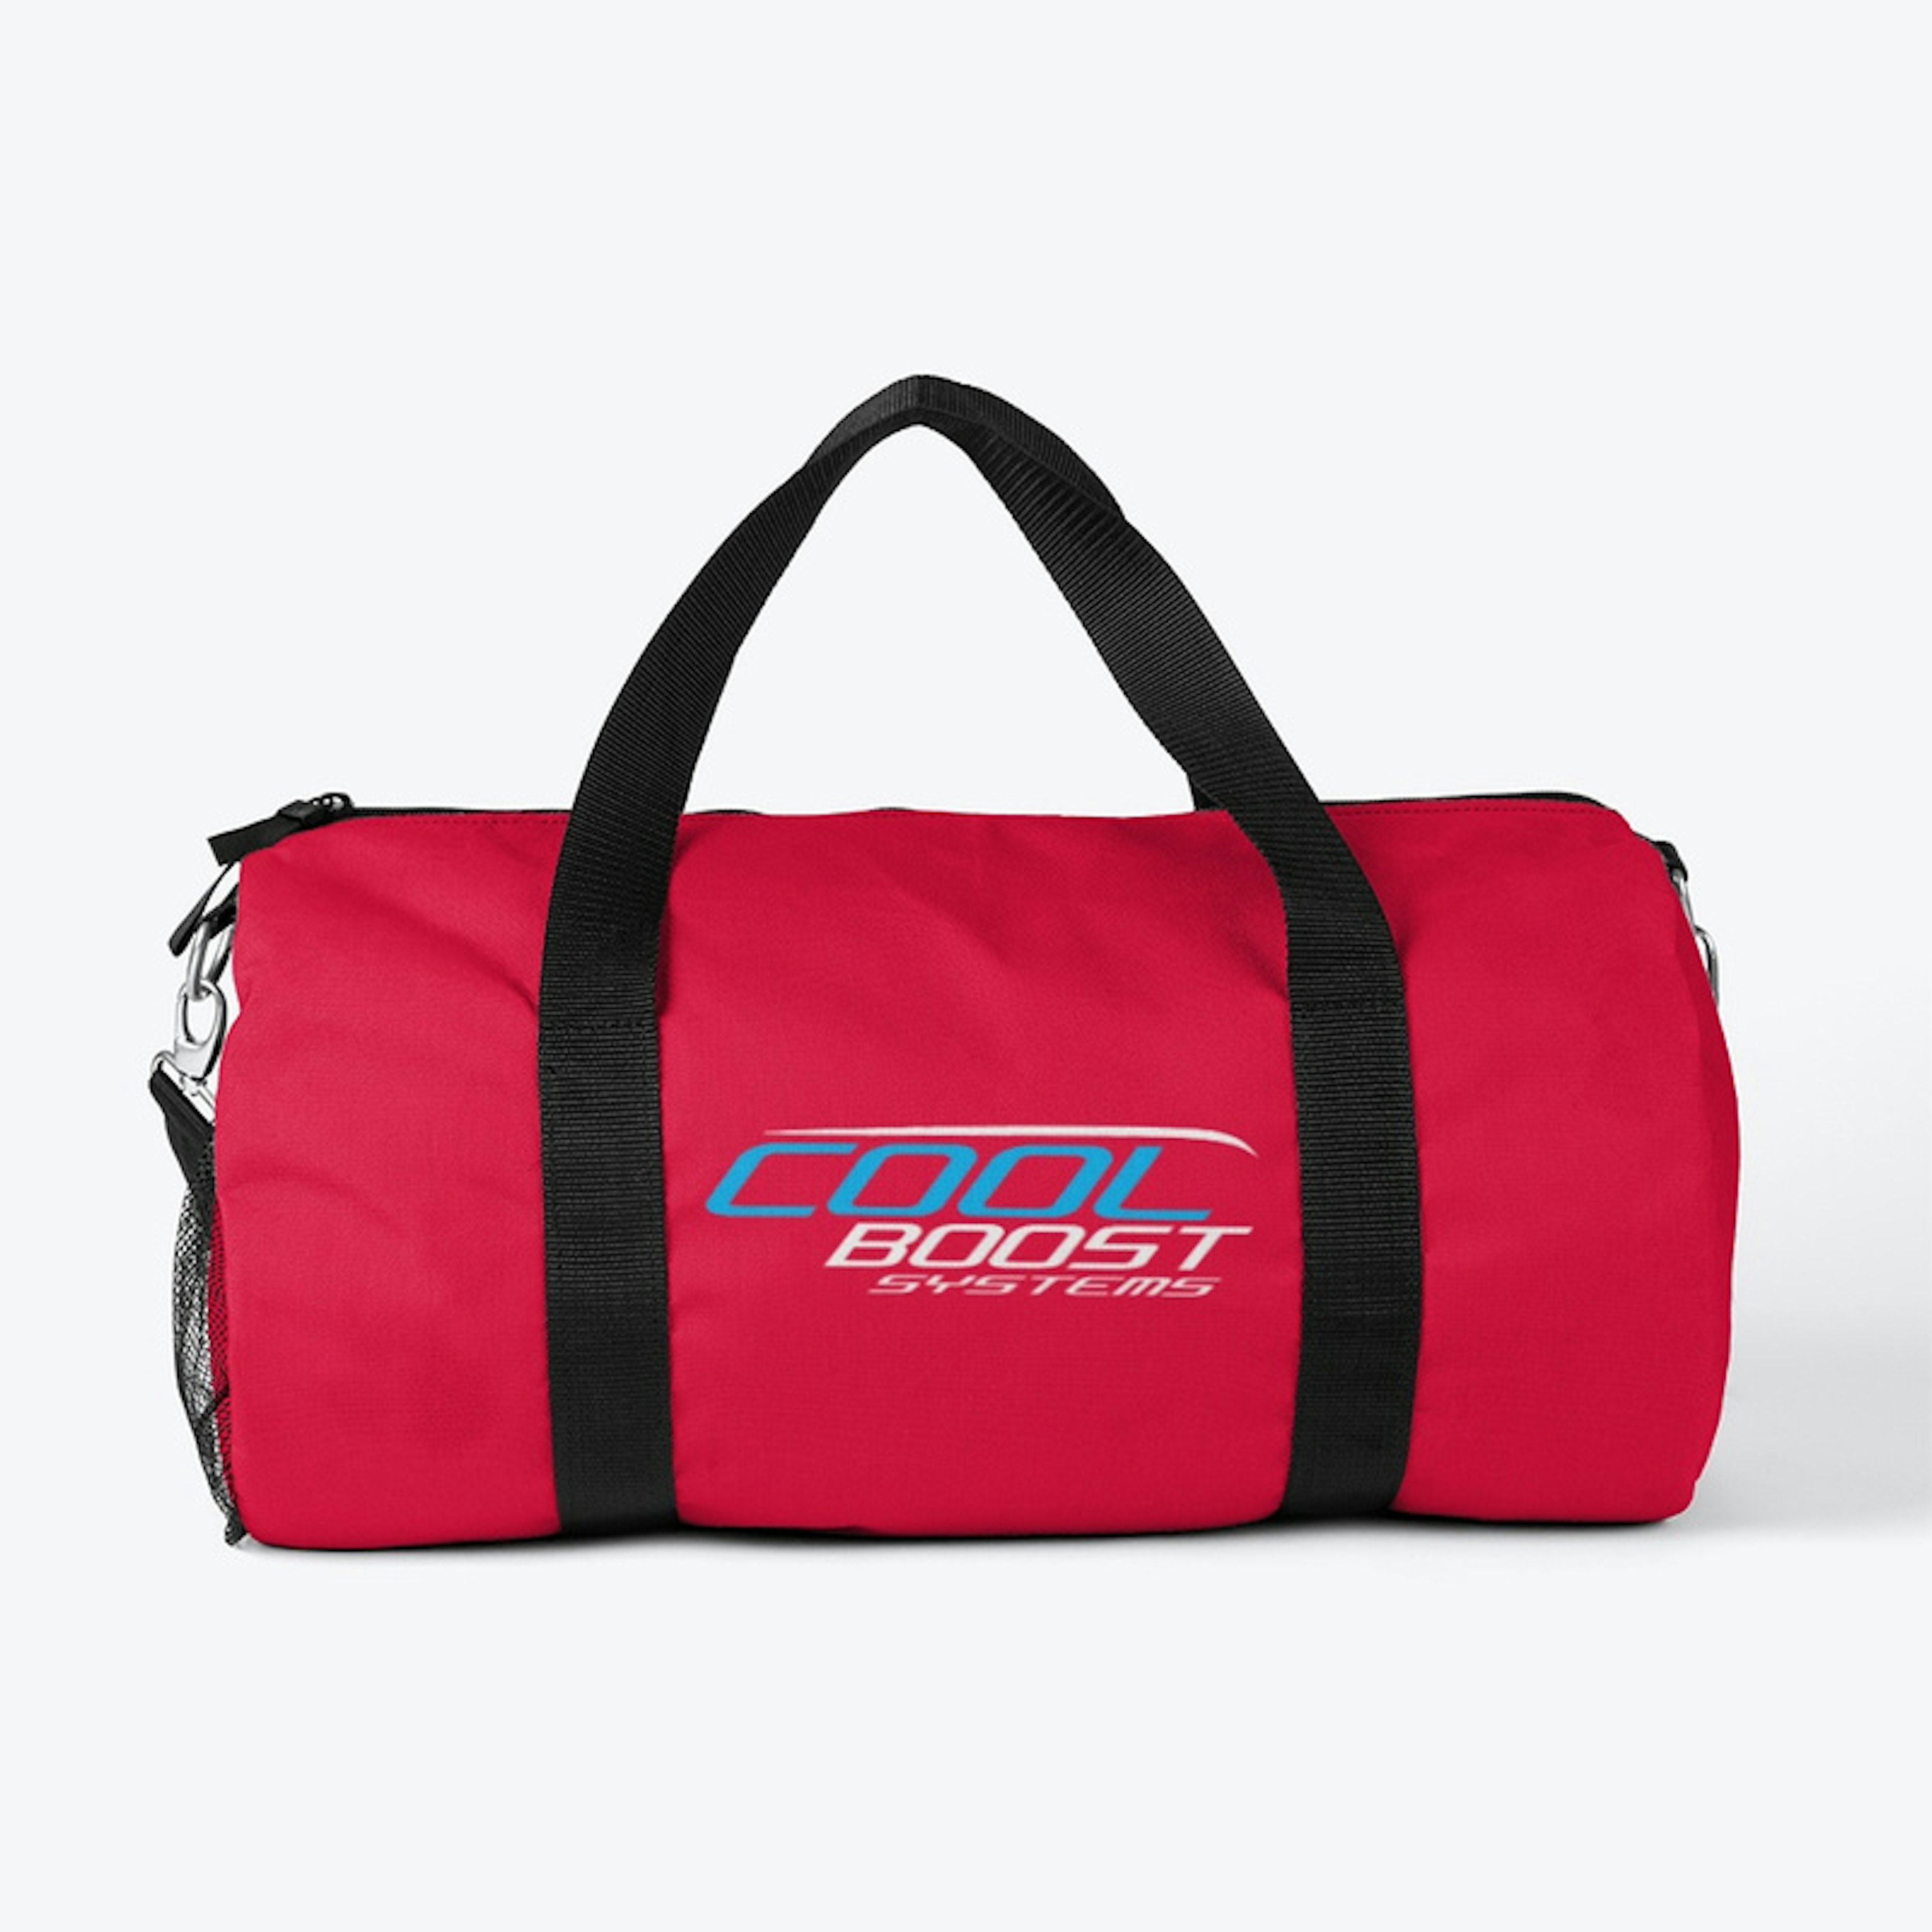 CoolBoost Systems Duffle bag